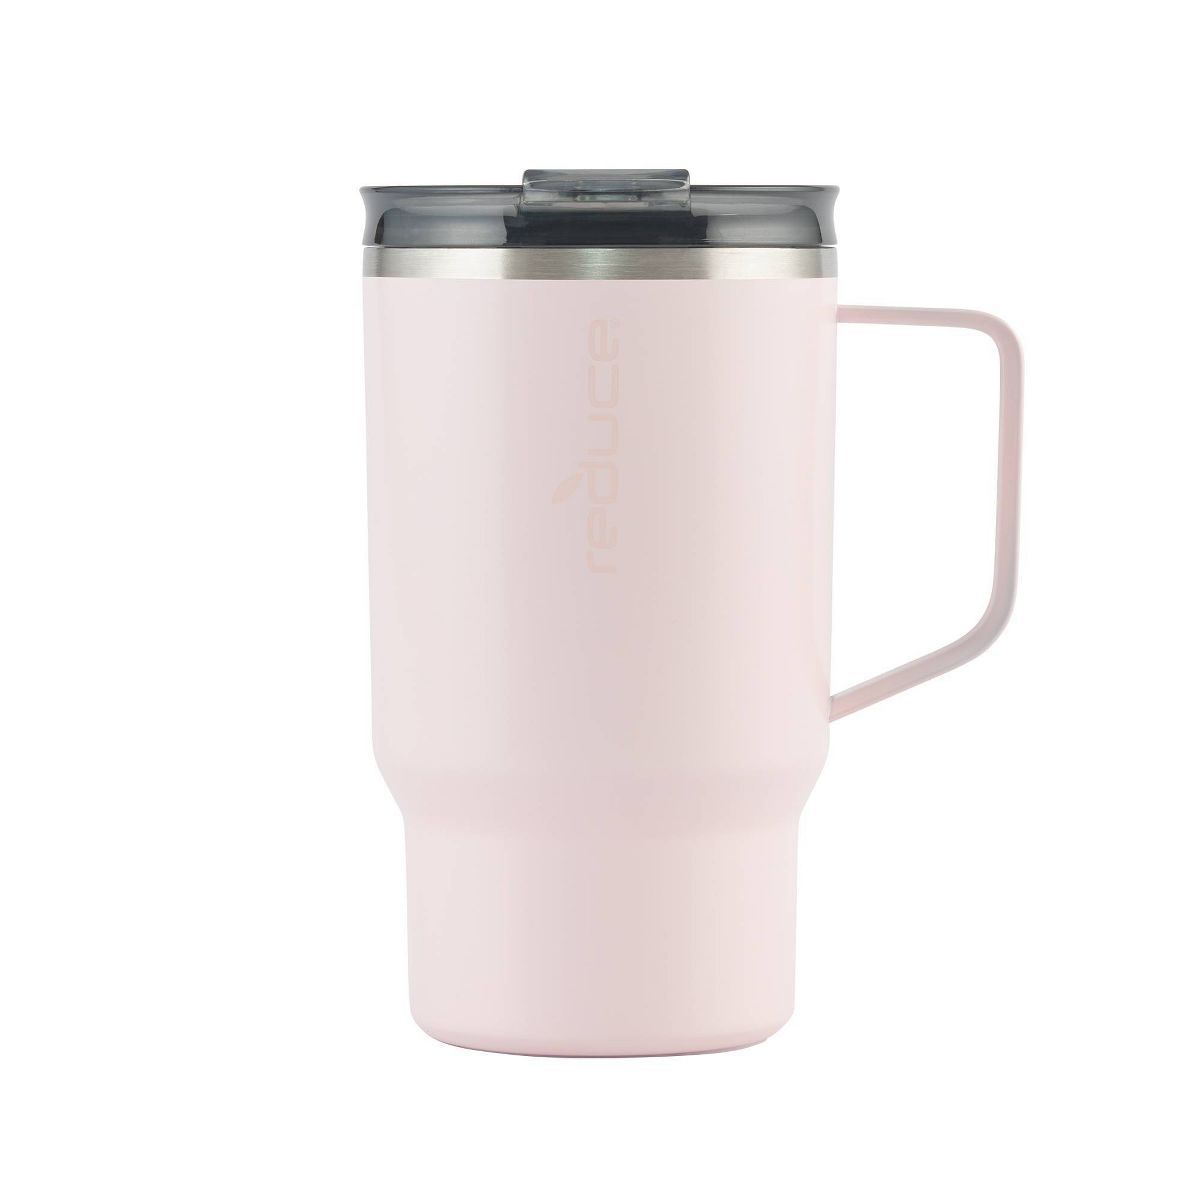 Reduce 18oz Hot1 Insulated Stainless Steel Travel Mug with Steam Release Lid | Target